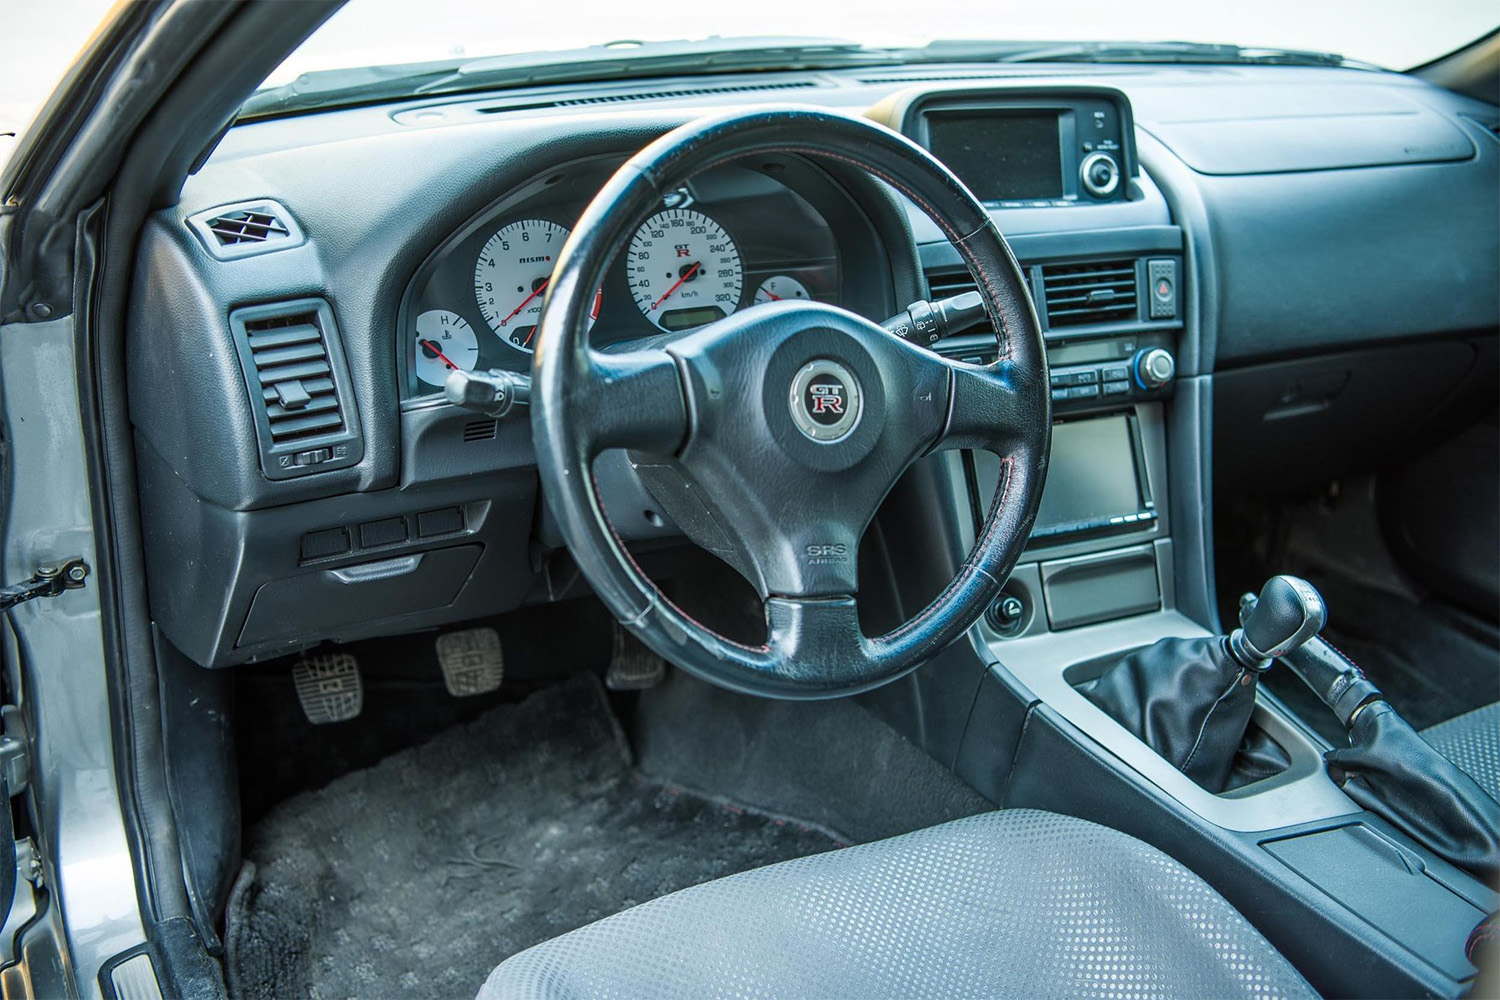 Interior of Left Hand Drive Converted Nissan Skyline R34 GT-R